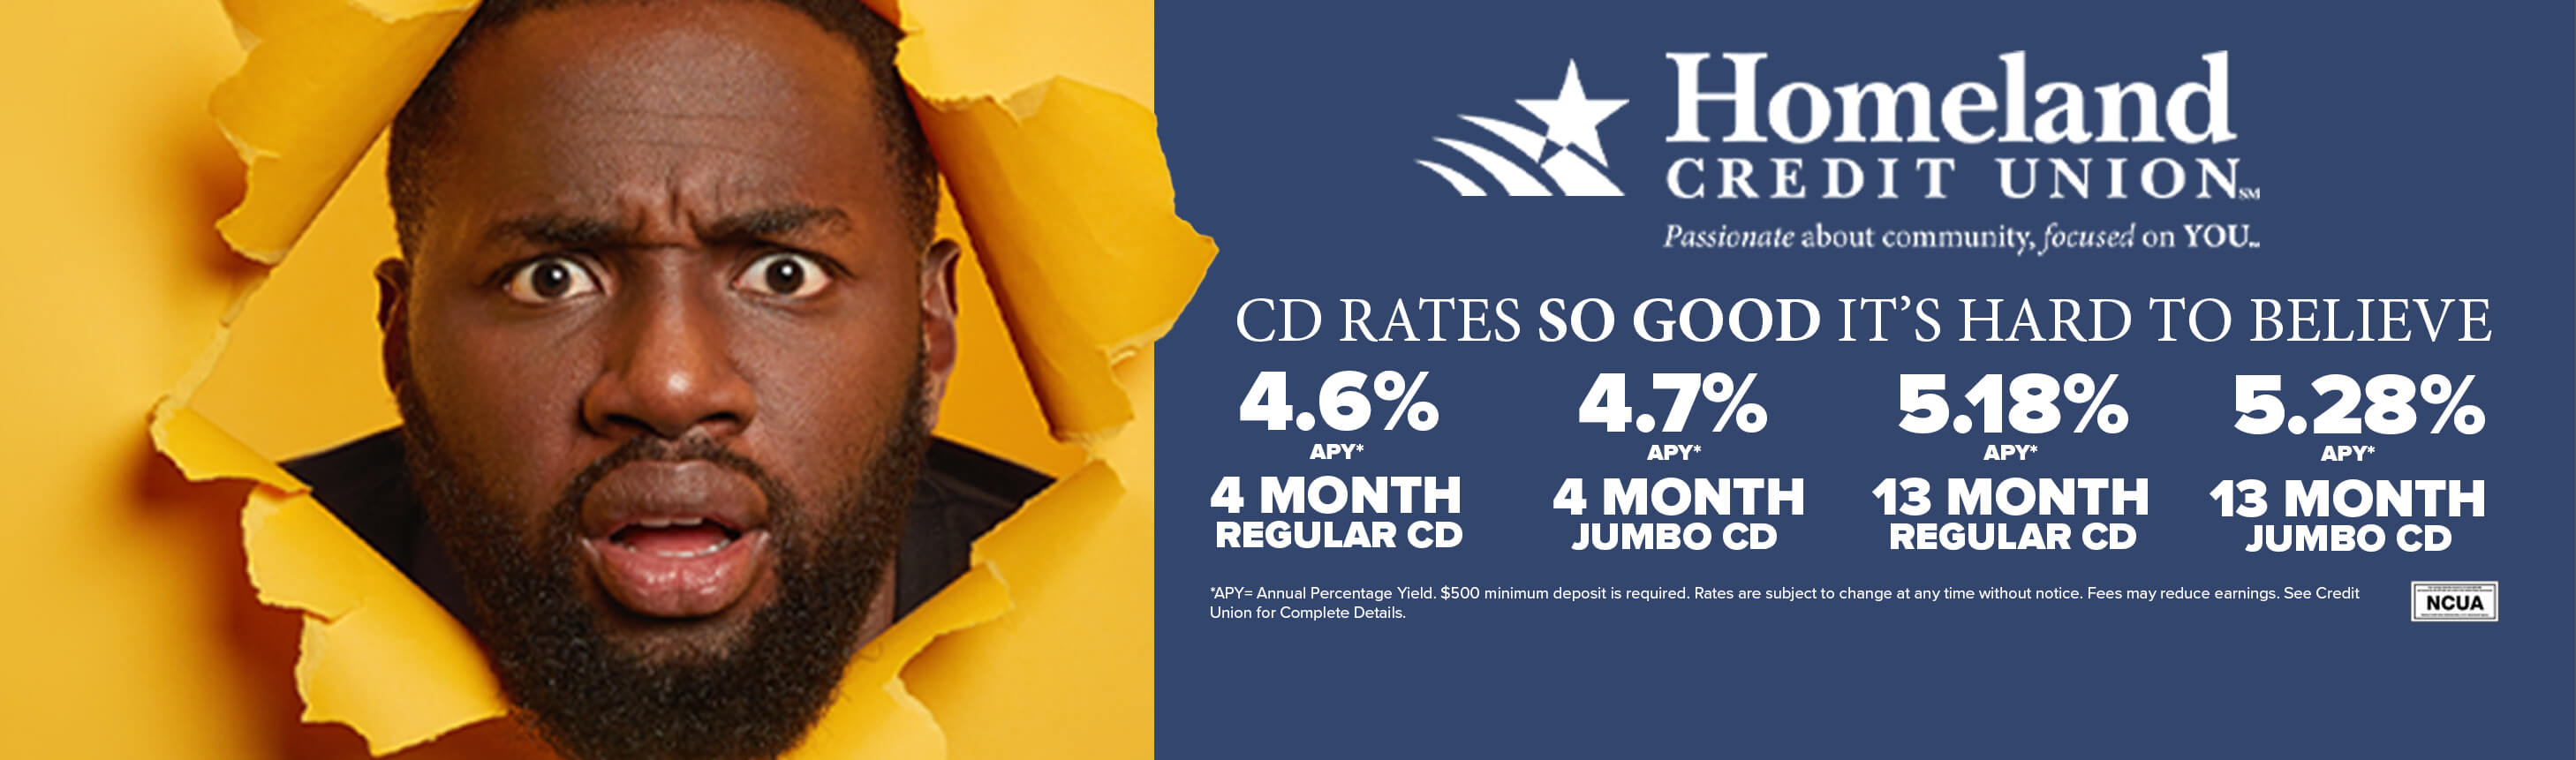 CD rates so good it's hard to believe. 4.6% APY 4 month regular cd. 4.7%APY 4 month jumbo CD. 5.18% APY 13 month regular CD. 5.28% APY jumbo cd. *APY = Annual Percentage Yield. $500 minimum deposit is required. Rates are subject to change at any time without prior notice. Fees may reduce earnings. See Credit Union for complete details.